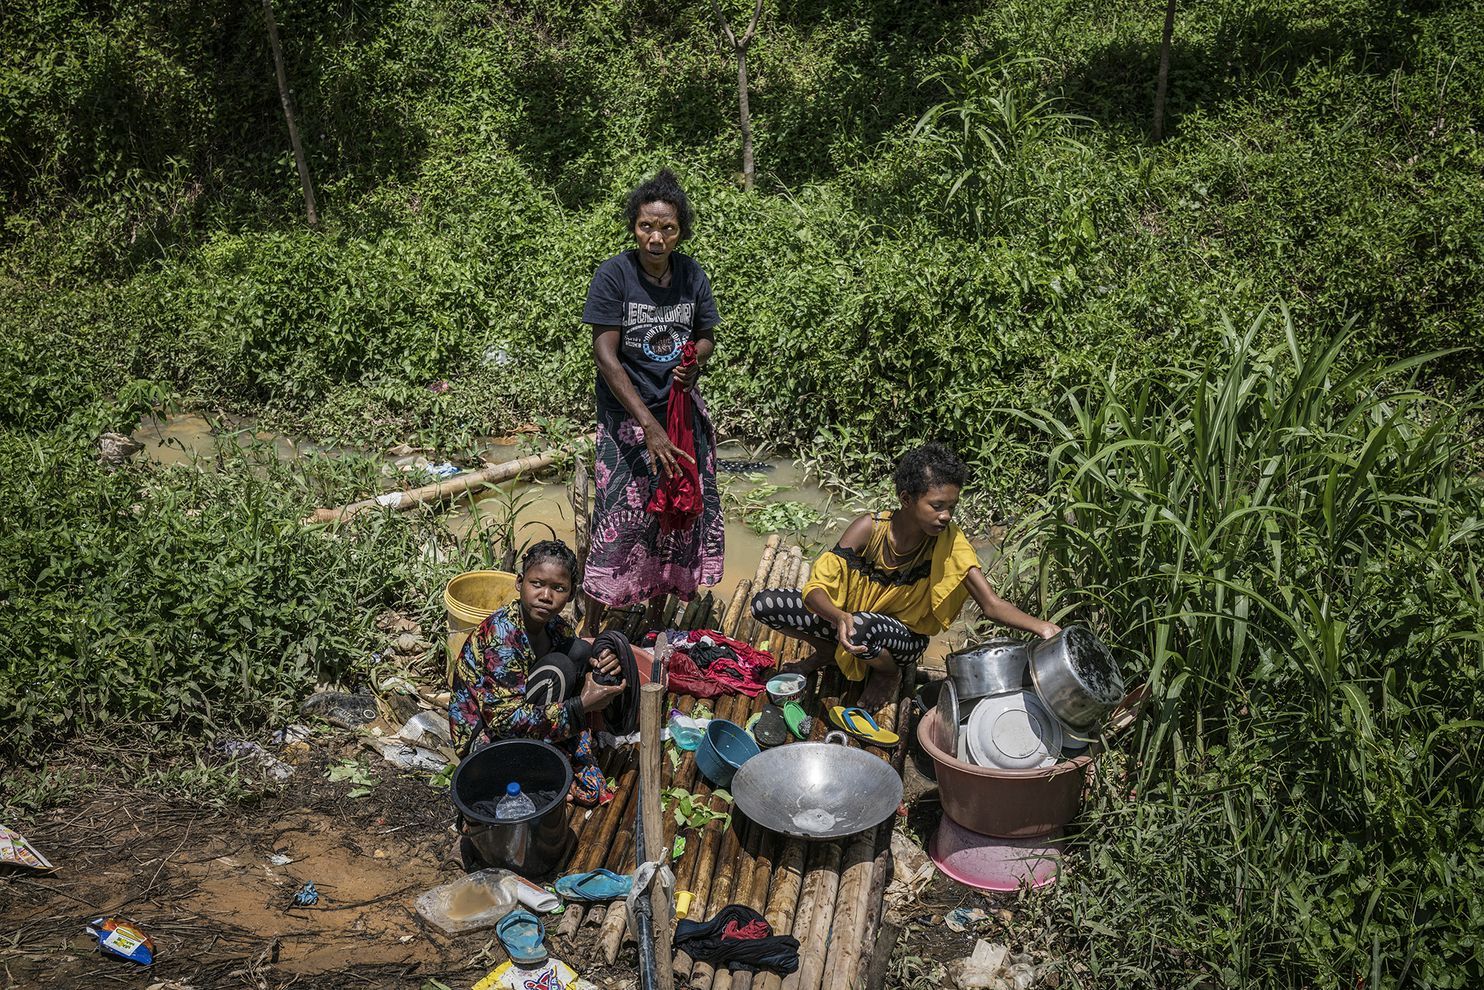 A mother and her two daughters wash pots and clothing at the water source that most Batek believe was contaminated by mining runoff. Despite that, they still use it as their primary water source. Image by James Whitlow Delano. Malaysia, 2019.